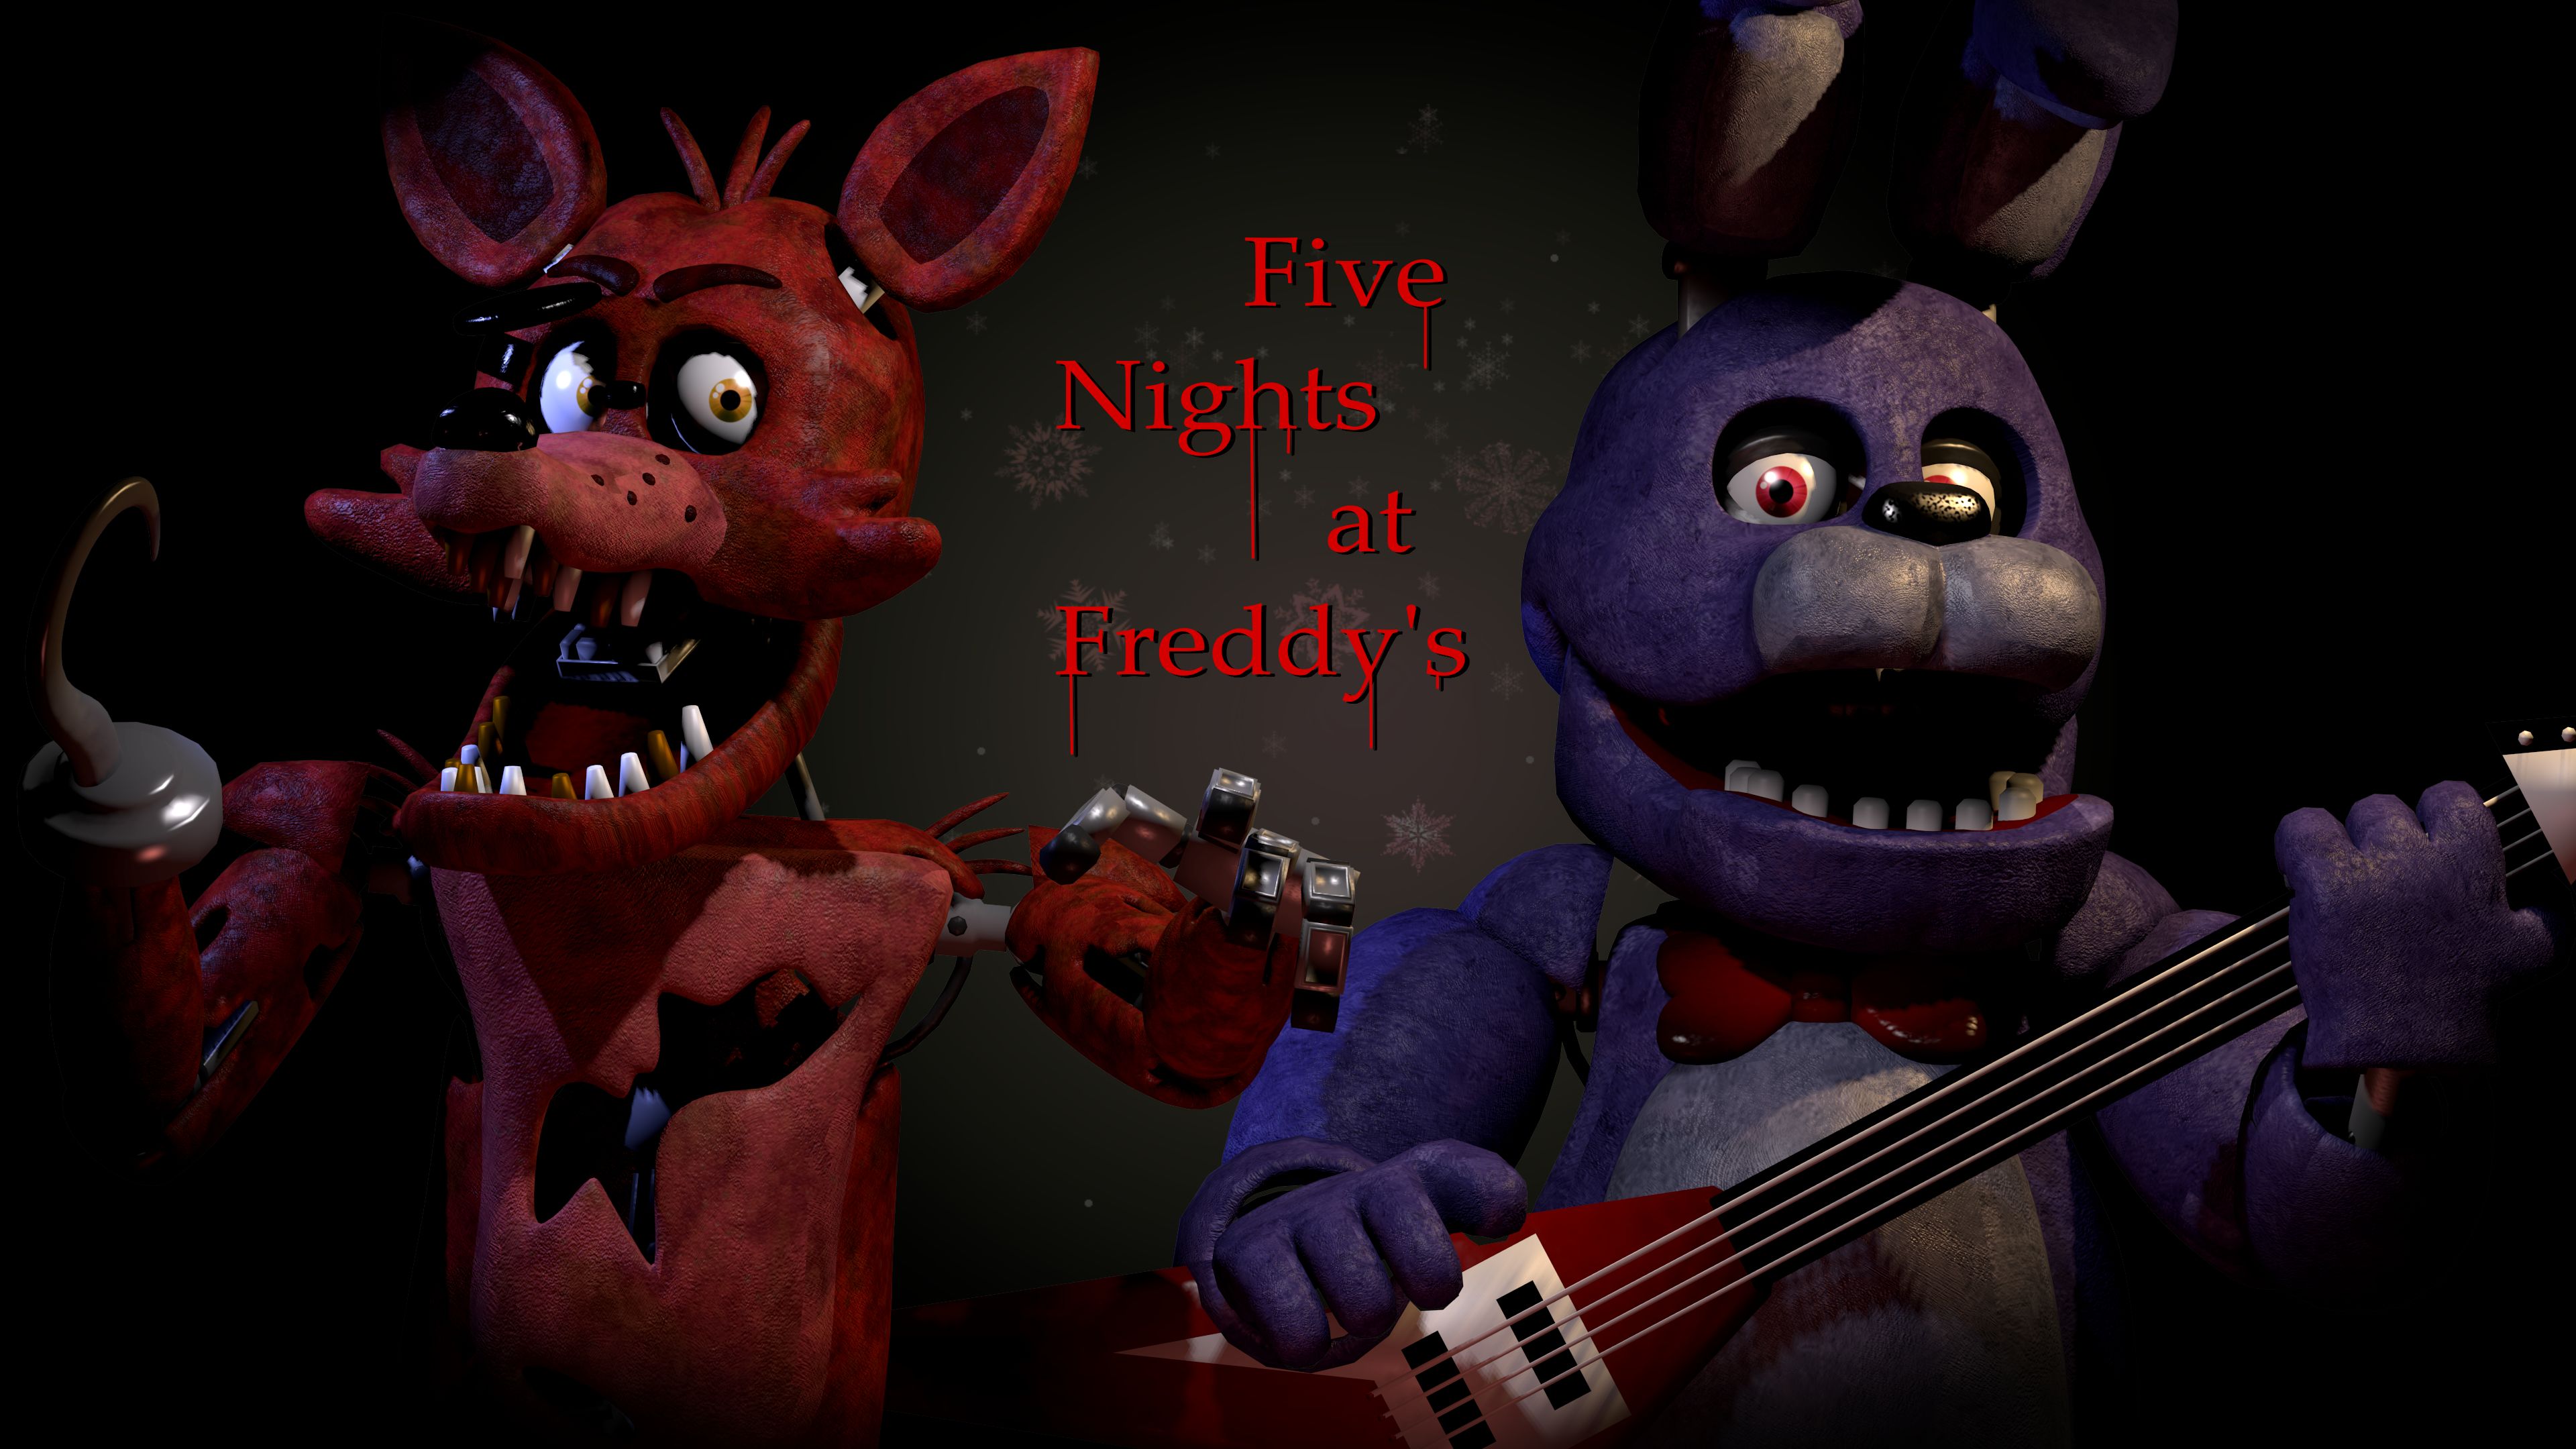 five nights at freddy's, video game, bonnie (five nights at freddy's), foxy (five nights at freddy's)